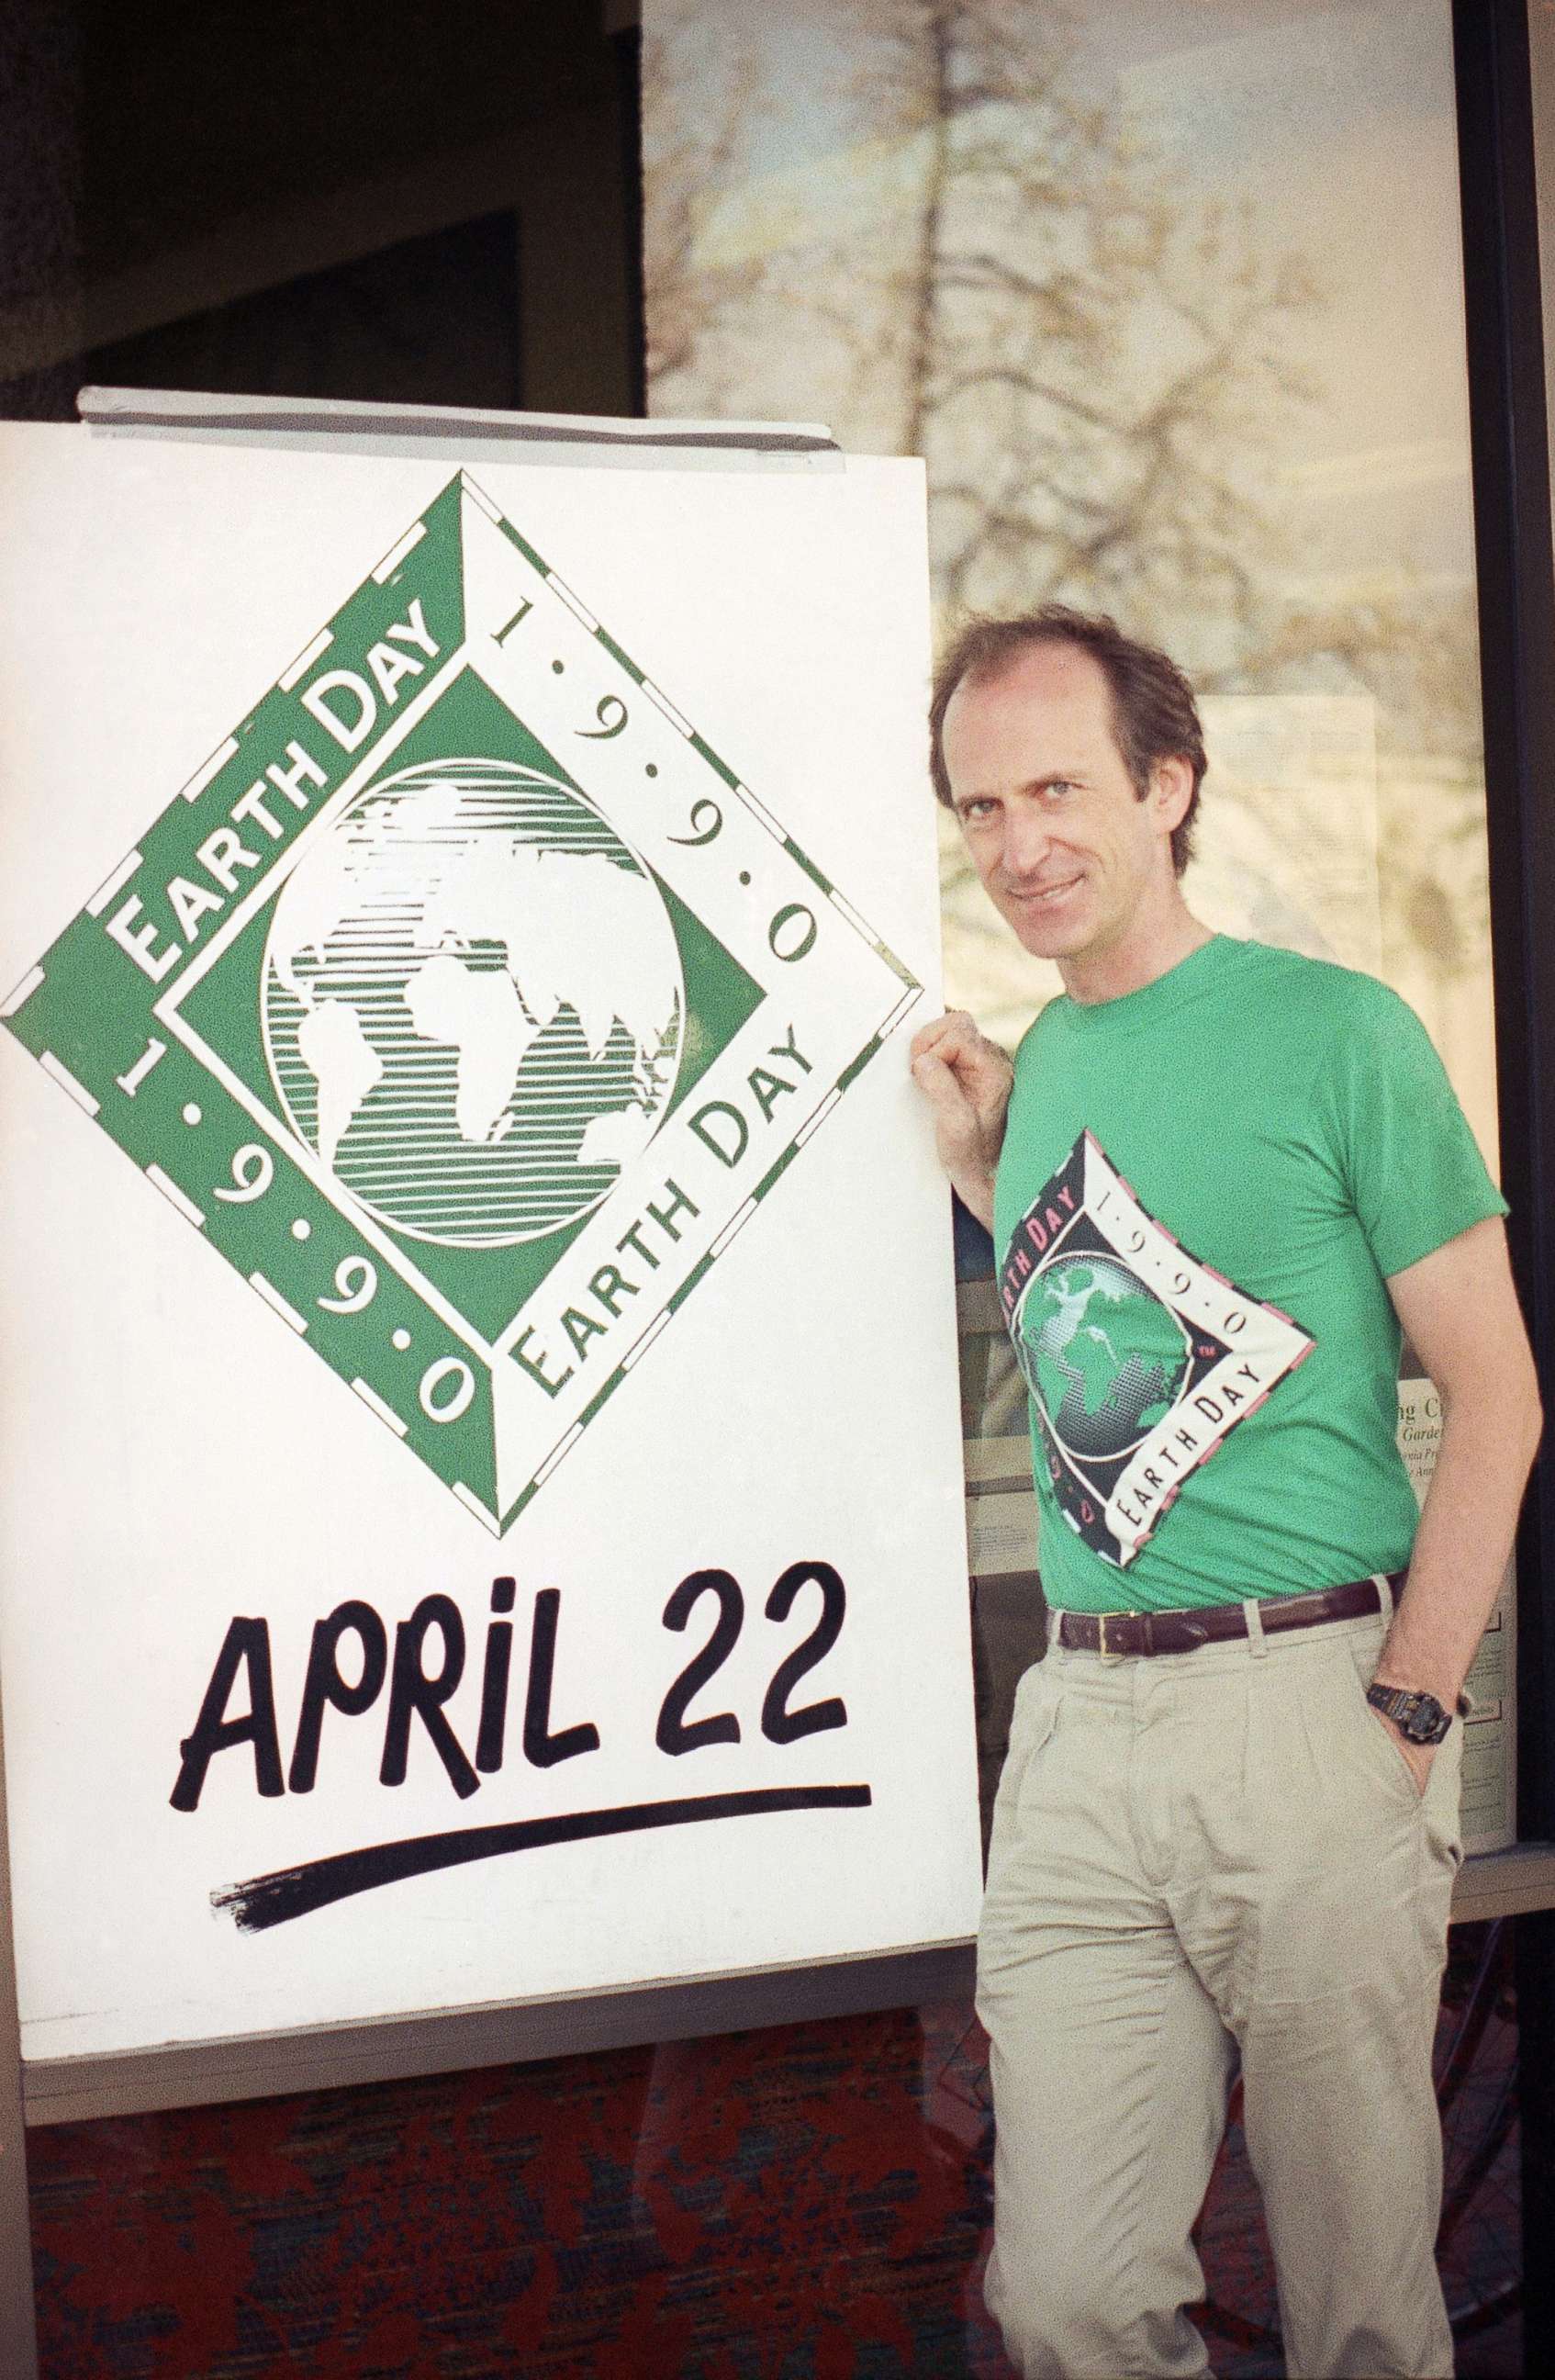 PHOTO: Earth Day founder Denis Hayes poses with an Earth Day sign outside Earth Day headquarters in Palo Alto, Calif., on April 21, 1990, in this file photo. Earth Day is set for April 22 with environmental activities planned throughout the world.